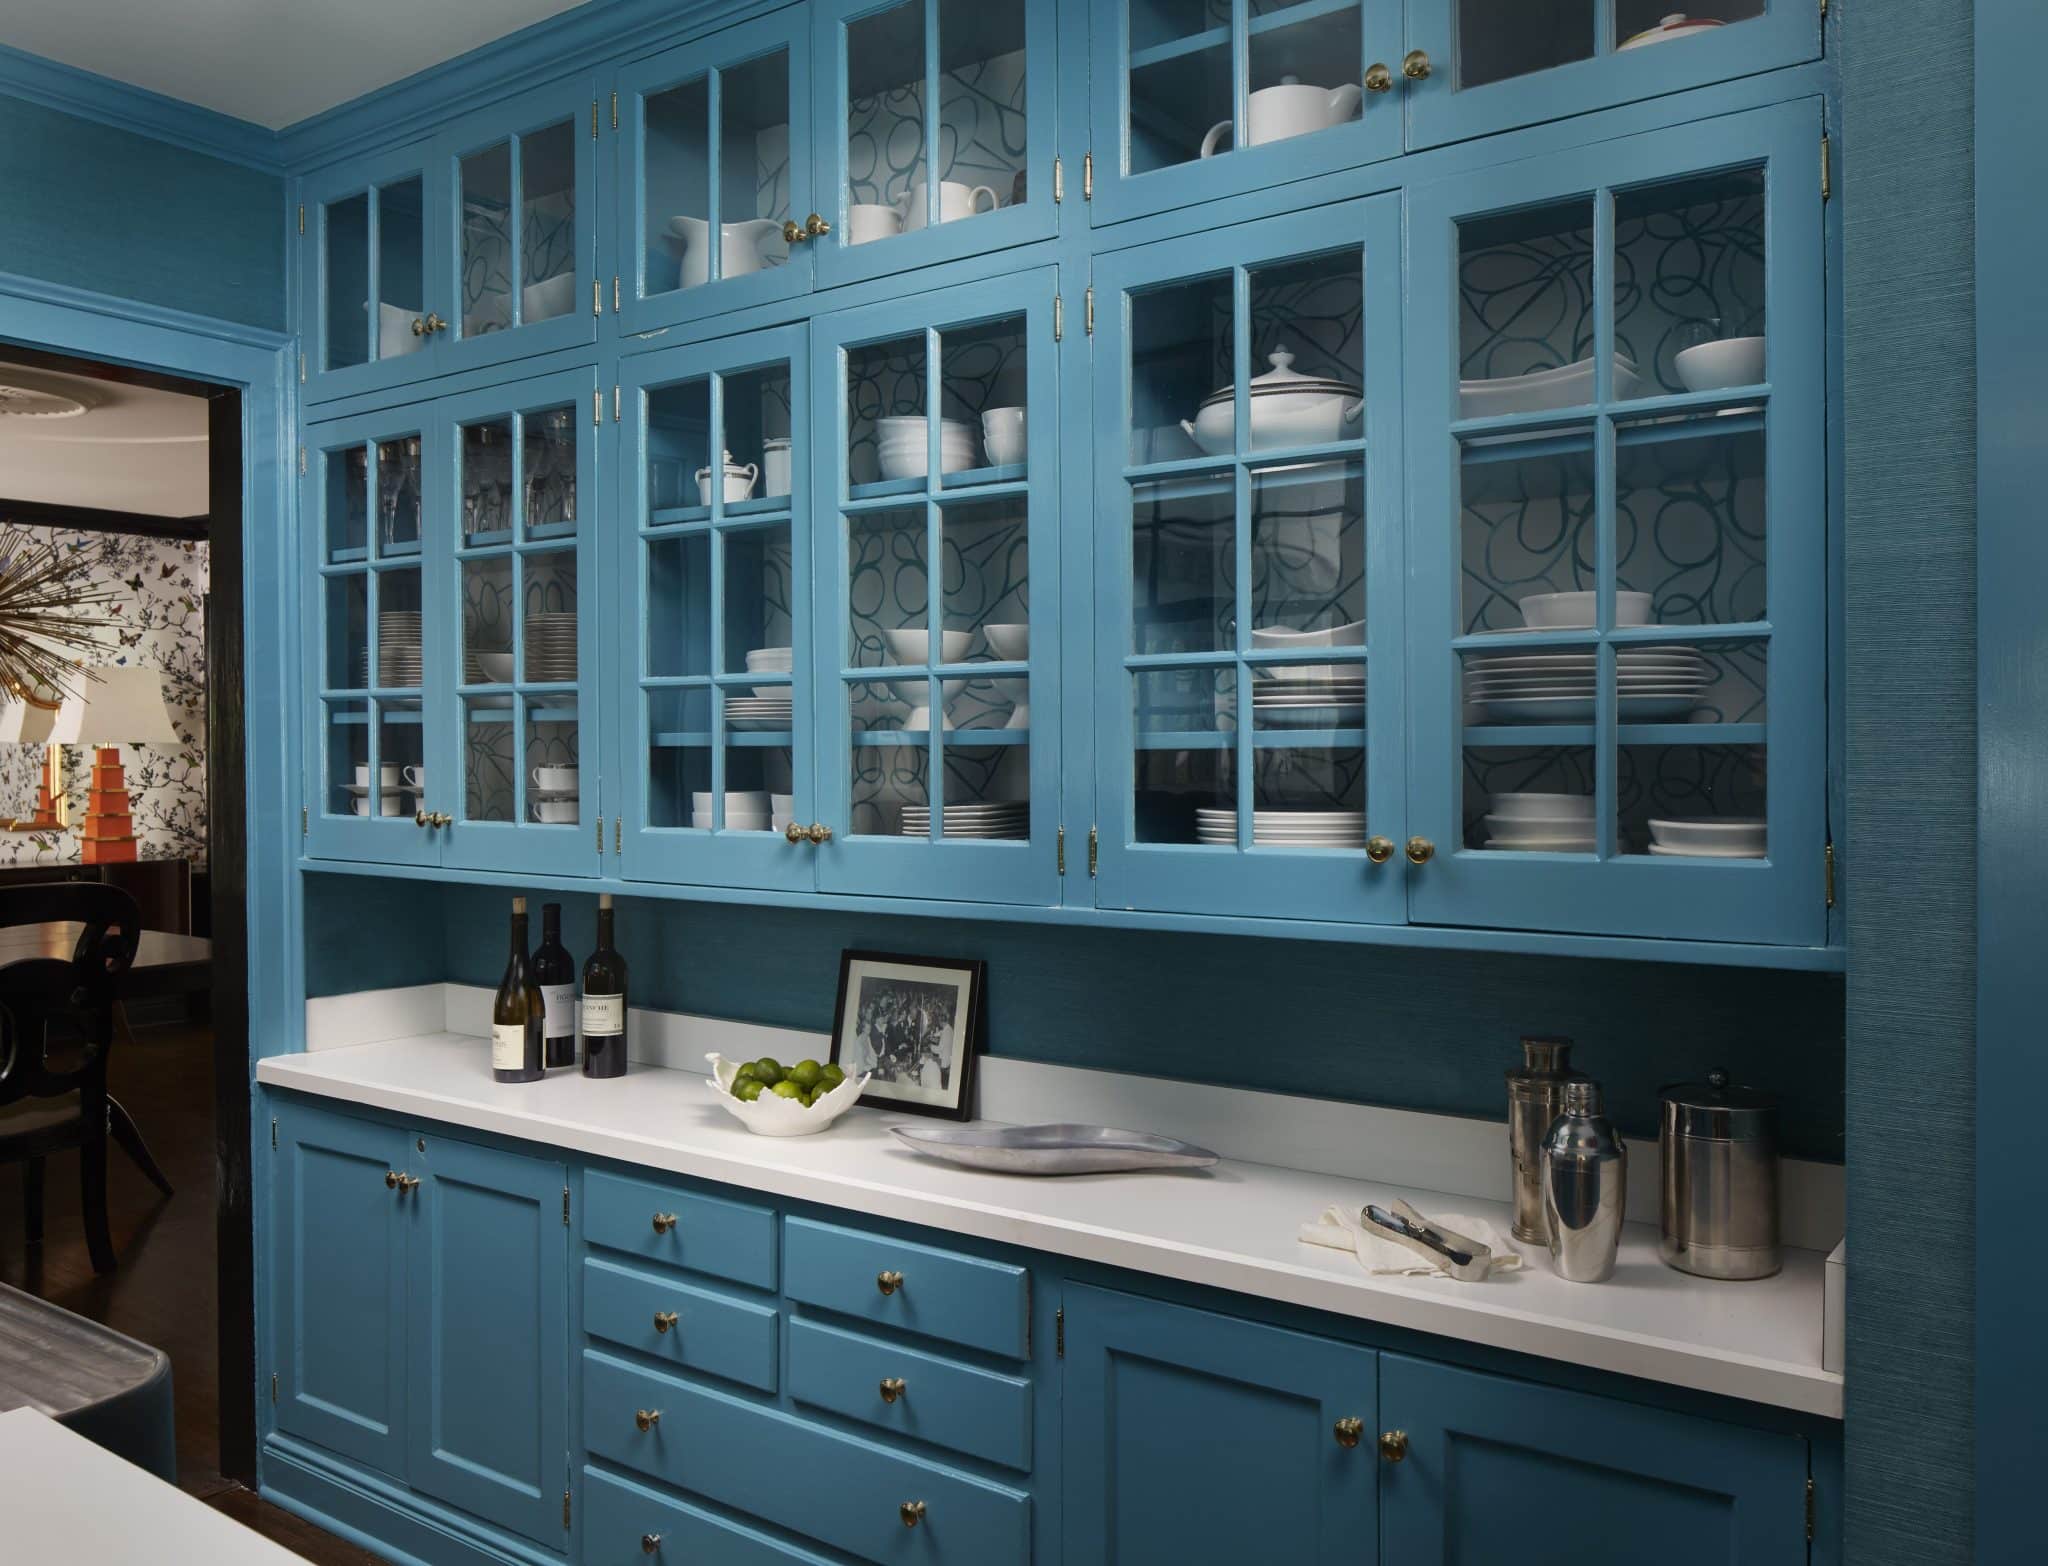 What Are the Latest Trends in Butler's Pantry Cabinet Designs